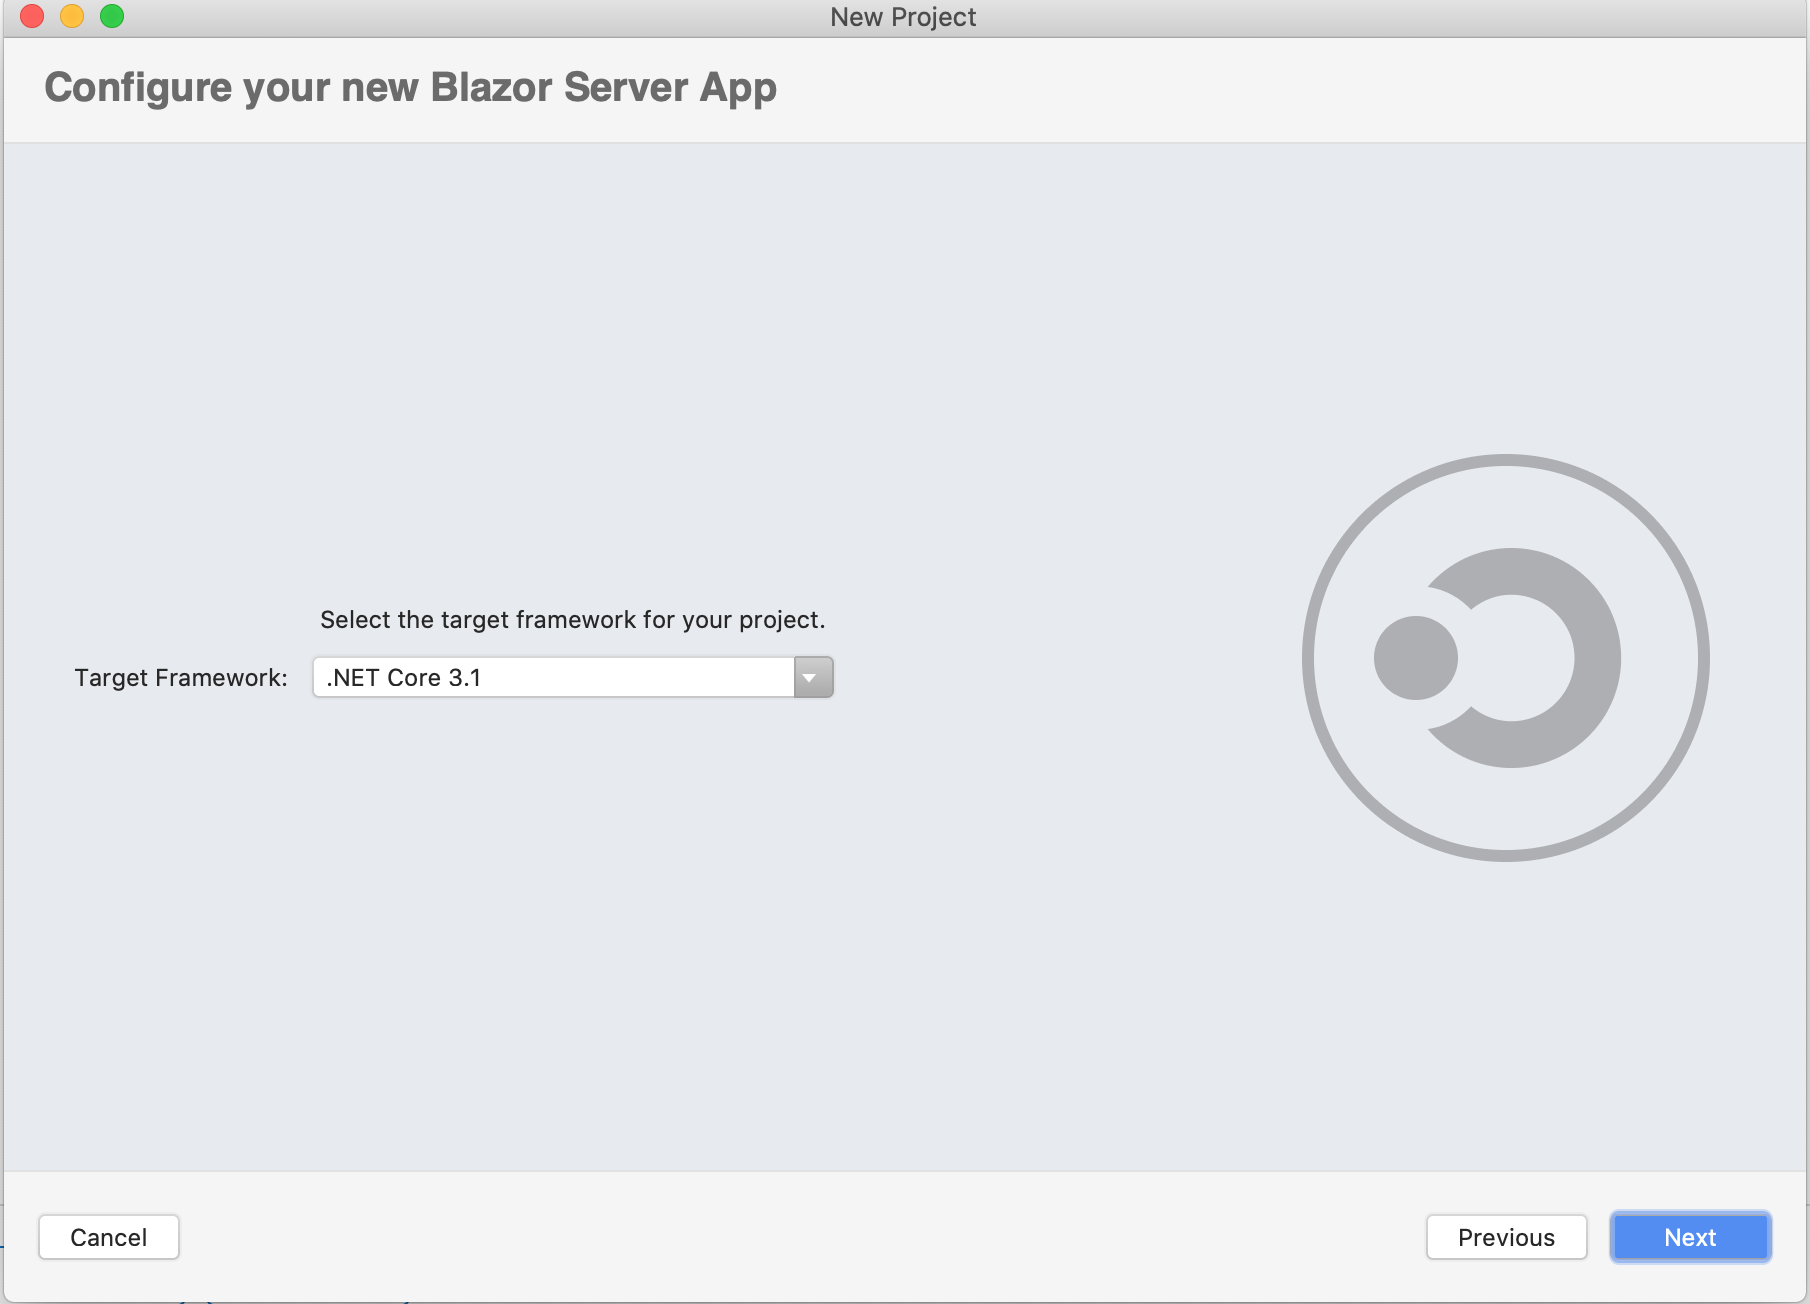 Configure your new Blazor Server App dialog displayed with Target Framework selected to .NET Core 3.1